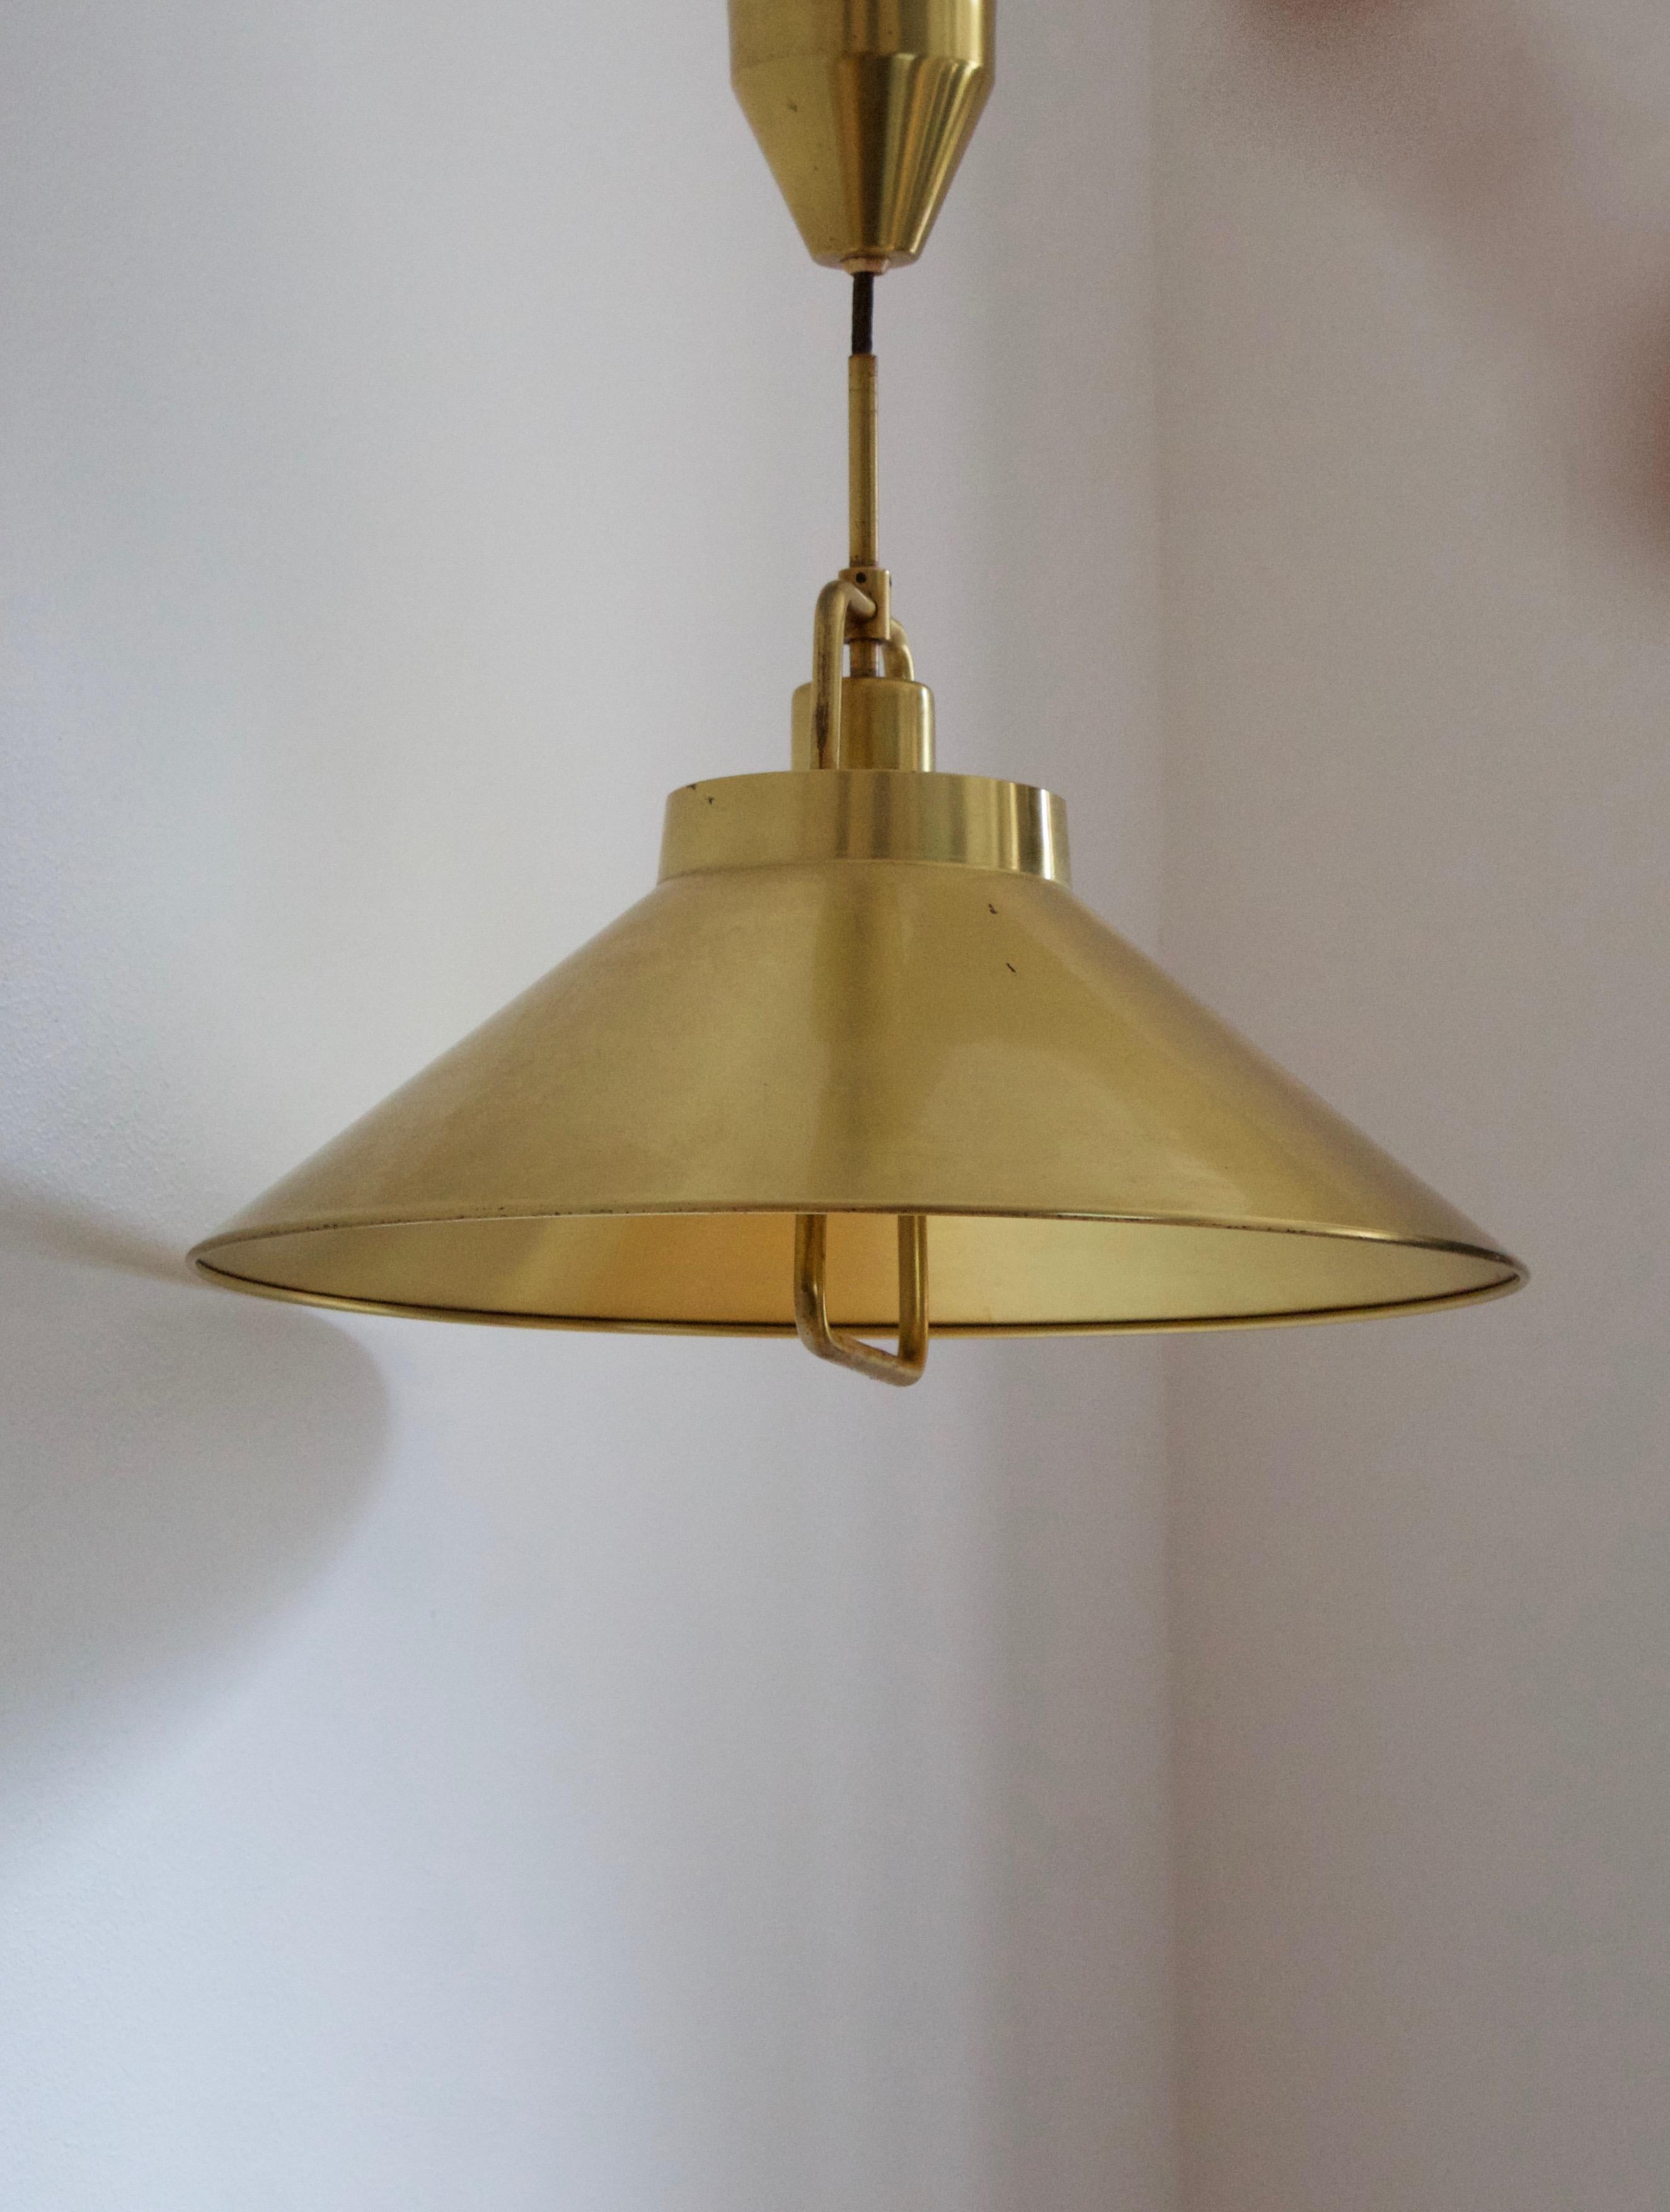 A pendant light designed by Danish architect Frits Schlegel in 1967. Produced by Lyfa. 

In brass. Stated height includes full drop as illustrated in primary image.